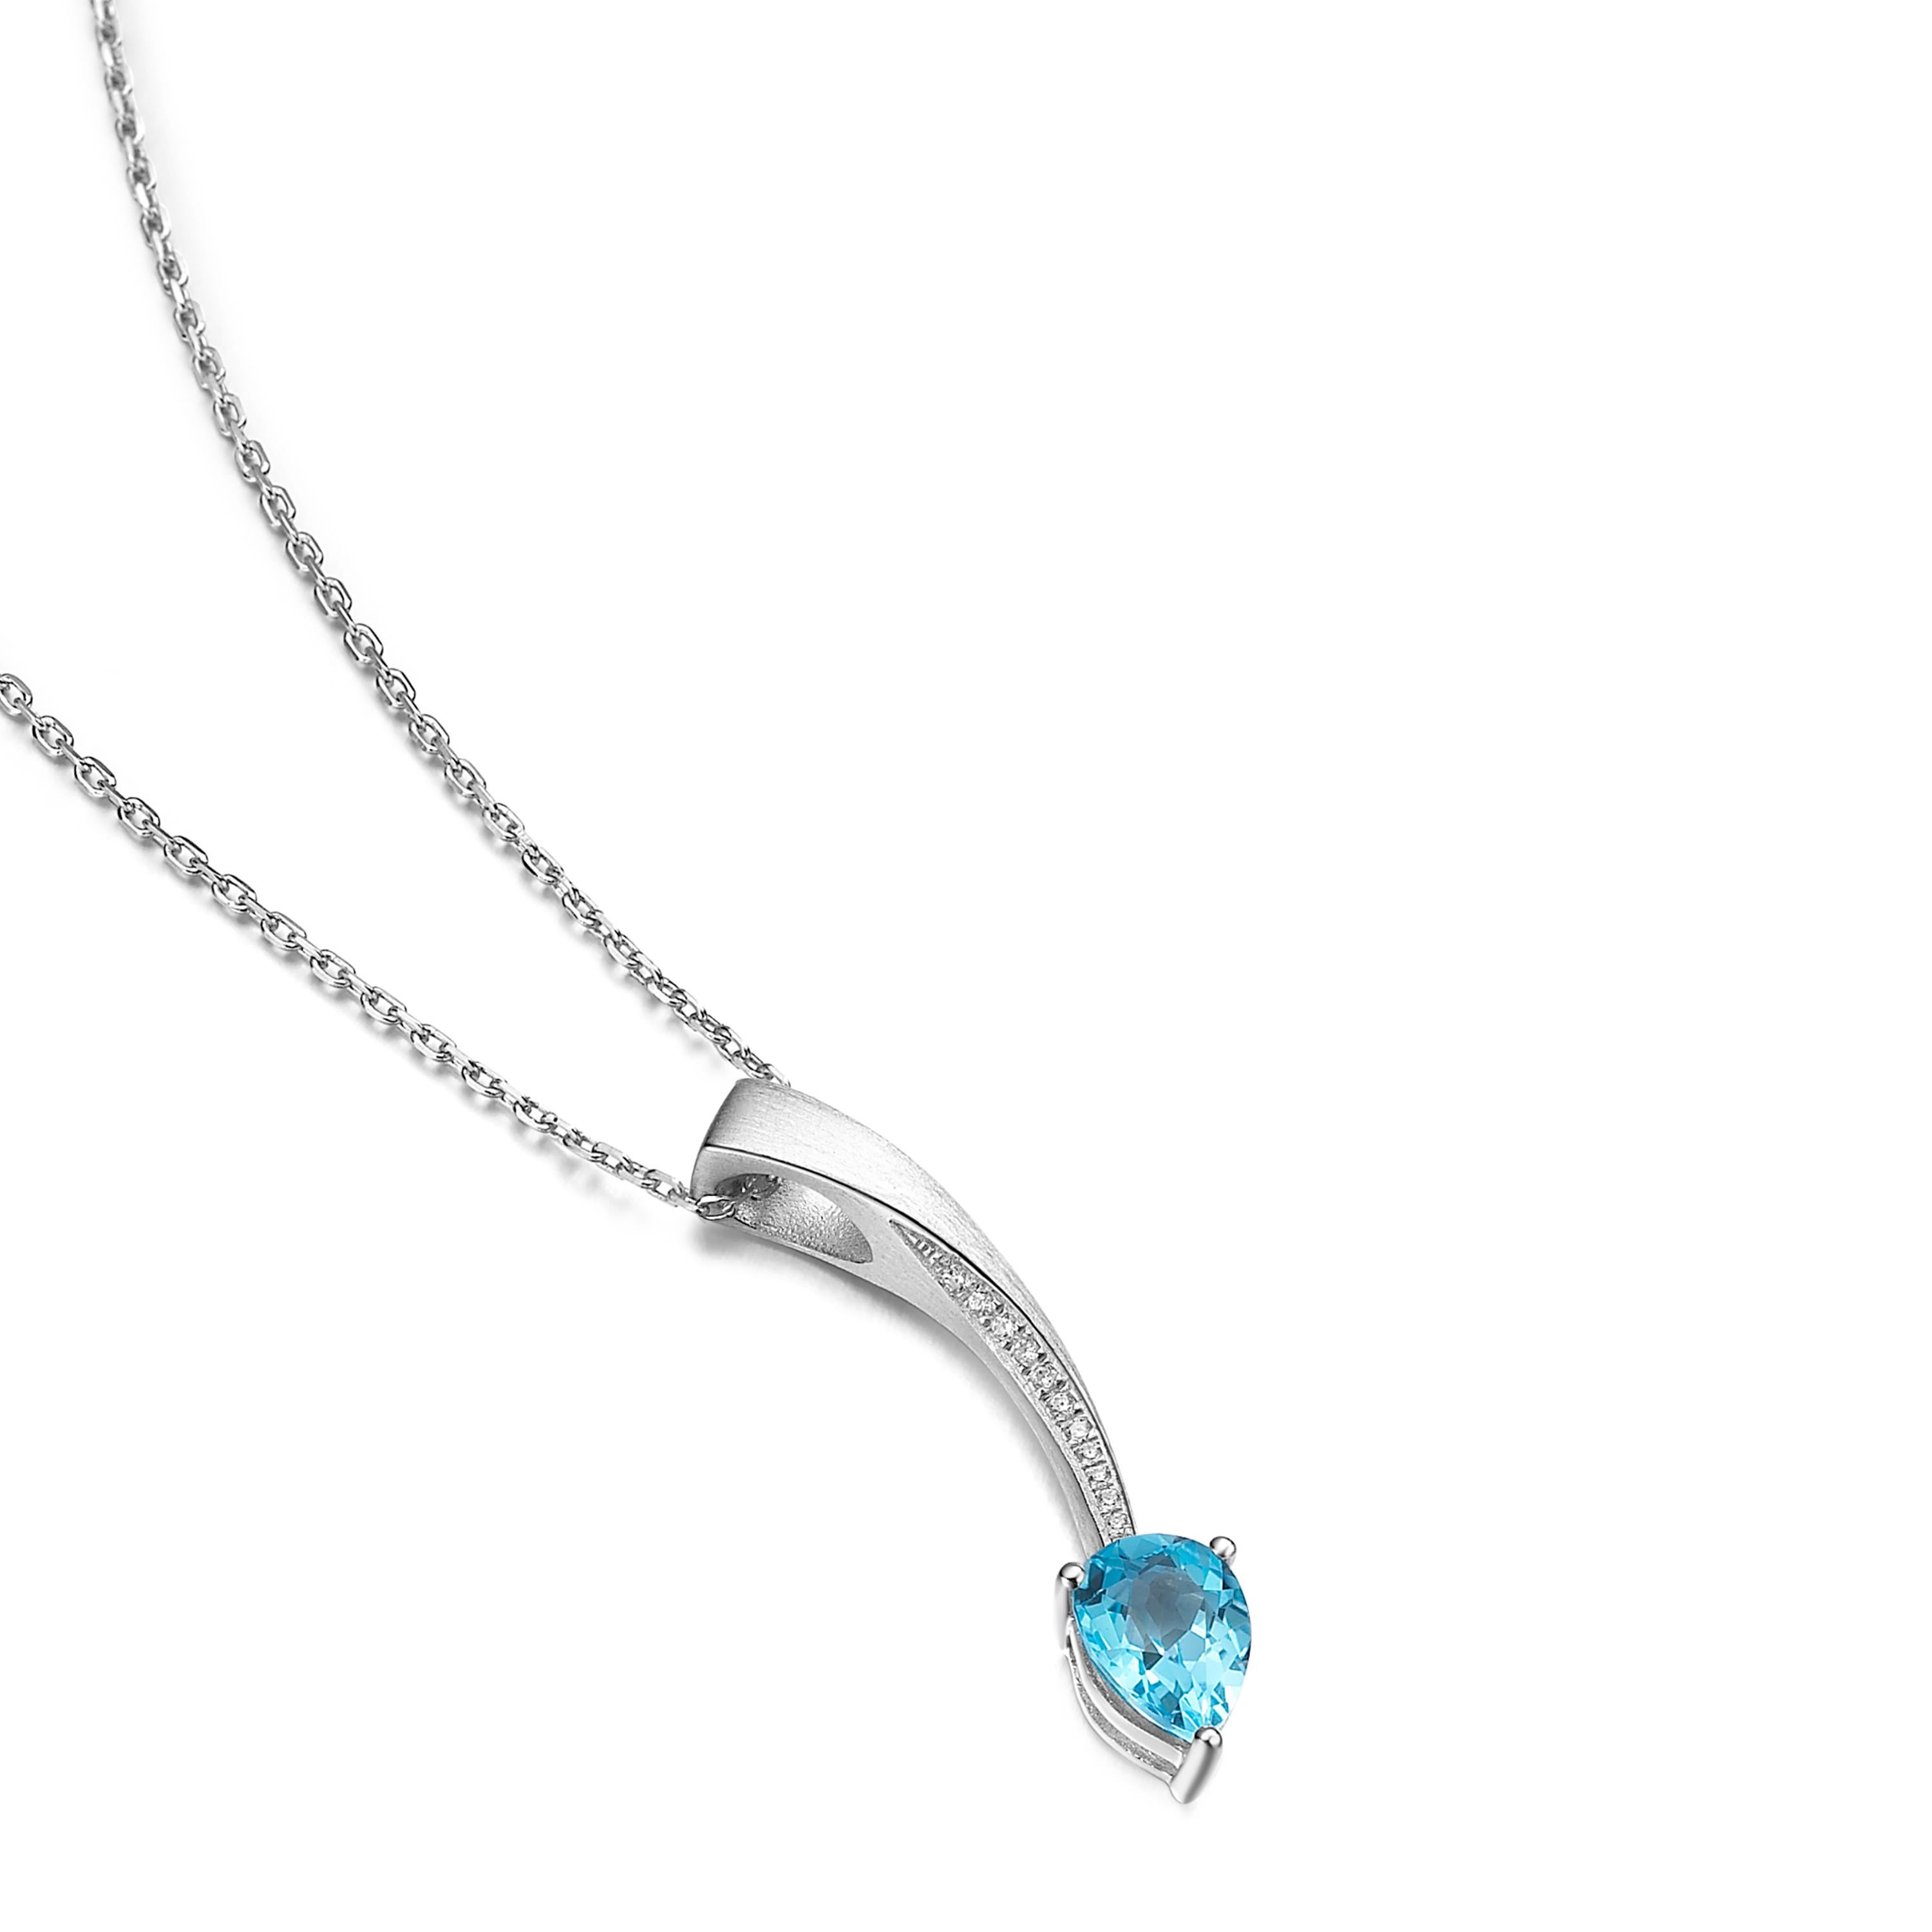 Description:
Shooting Star short pendant with pear cut blue topaz and Hearts and Arrows* white cubic zirconia, set in brush polished white rhodium plate** on sterling silver.  Chain length is 16 inches + 2 inch extension

*Hearts and Arrows refer to